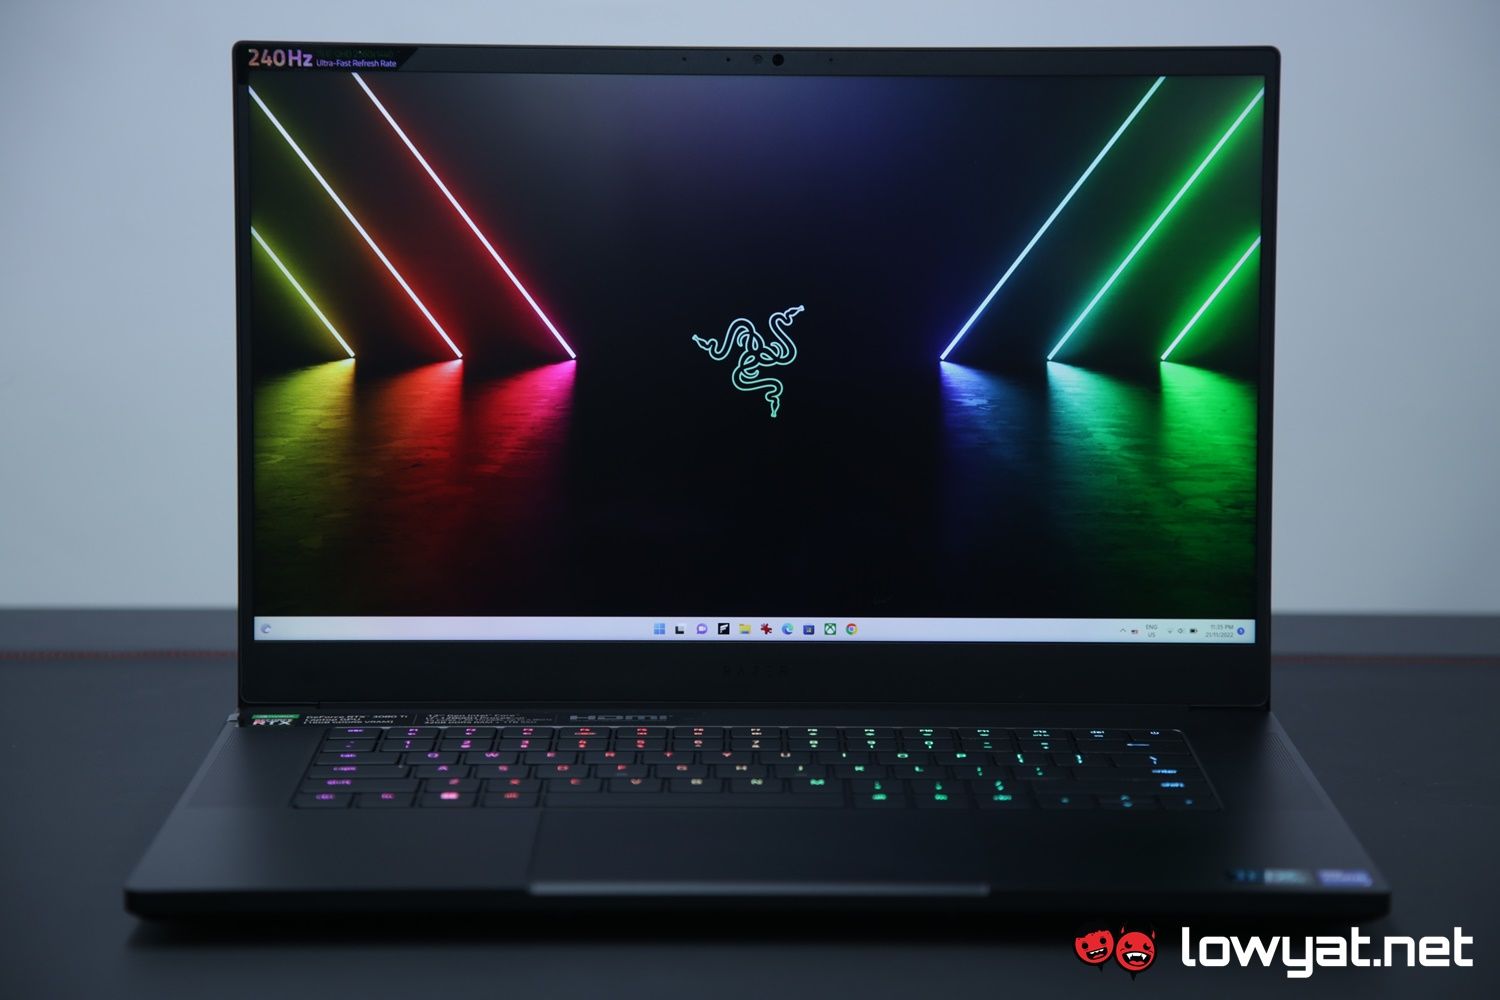 Razer Blade 15 review: This gaming laptop goes full throttle